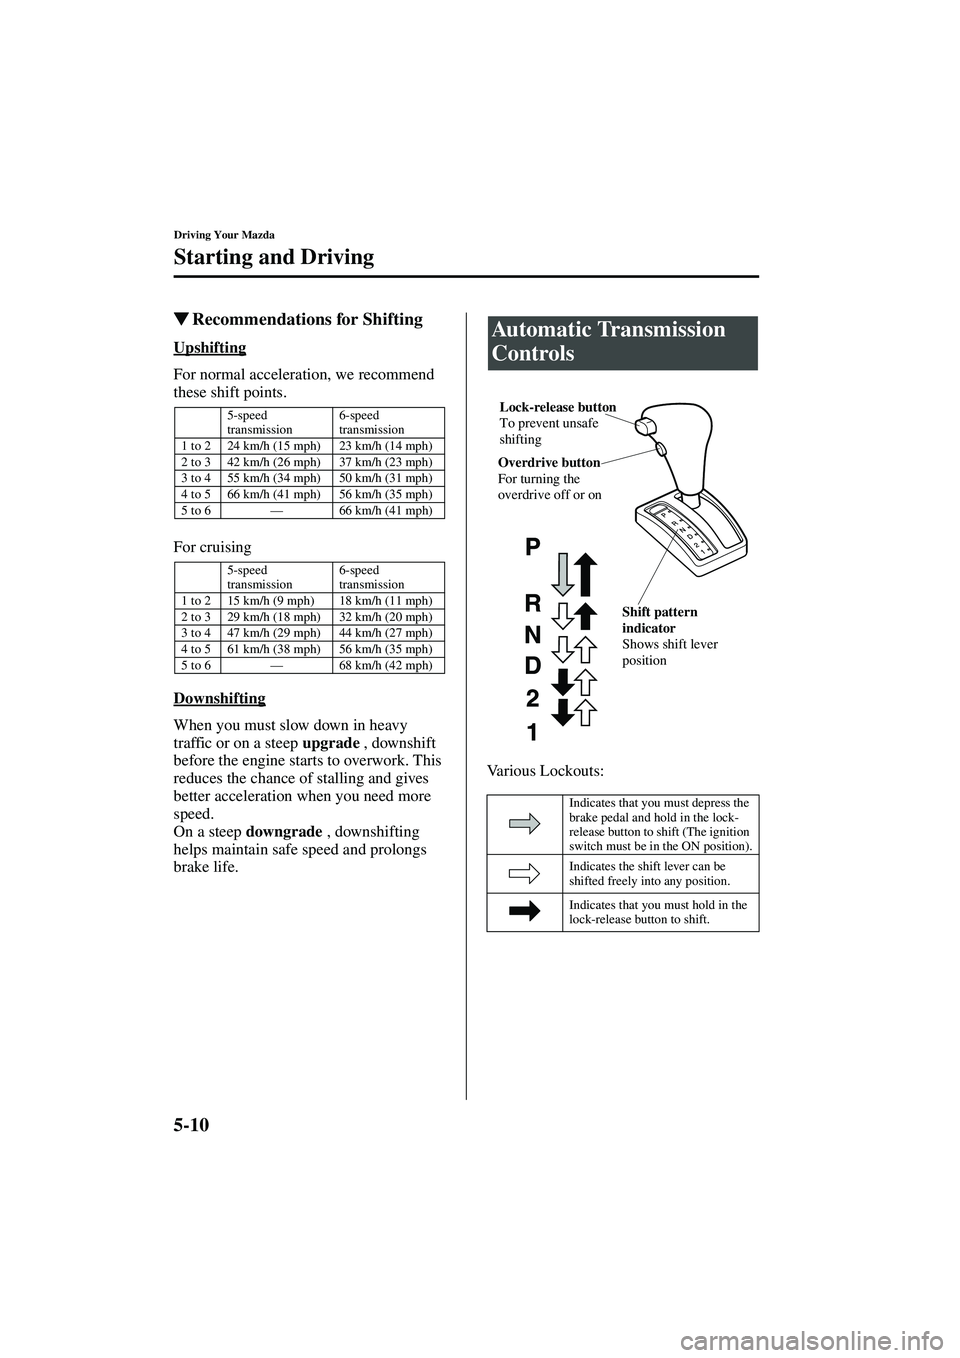 MAZDA MODEL MX-5 MIATA 2004  Owners Manual 5-10
Driving Your Mazda
Starting and Driving
Form No. 8S15-EA-03G
Recommendations for Shifting
Upshifting
For normal acceleration, we recommend 
these shift points.
For cruising
Downshifting
When you